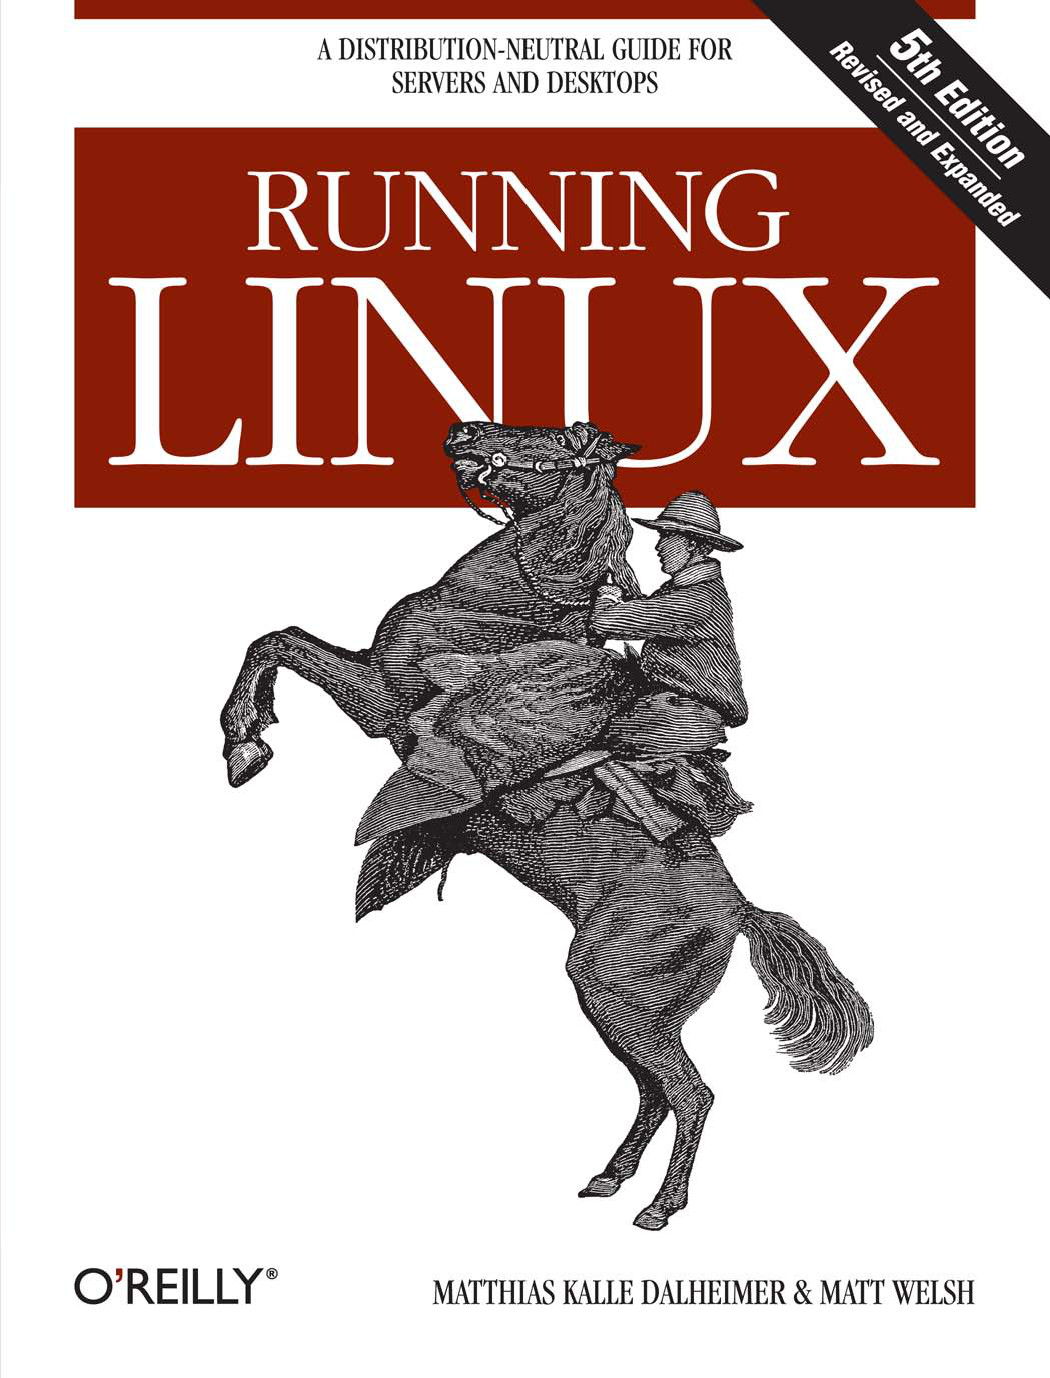 Running Linux, 5th Edition